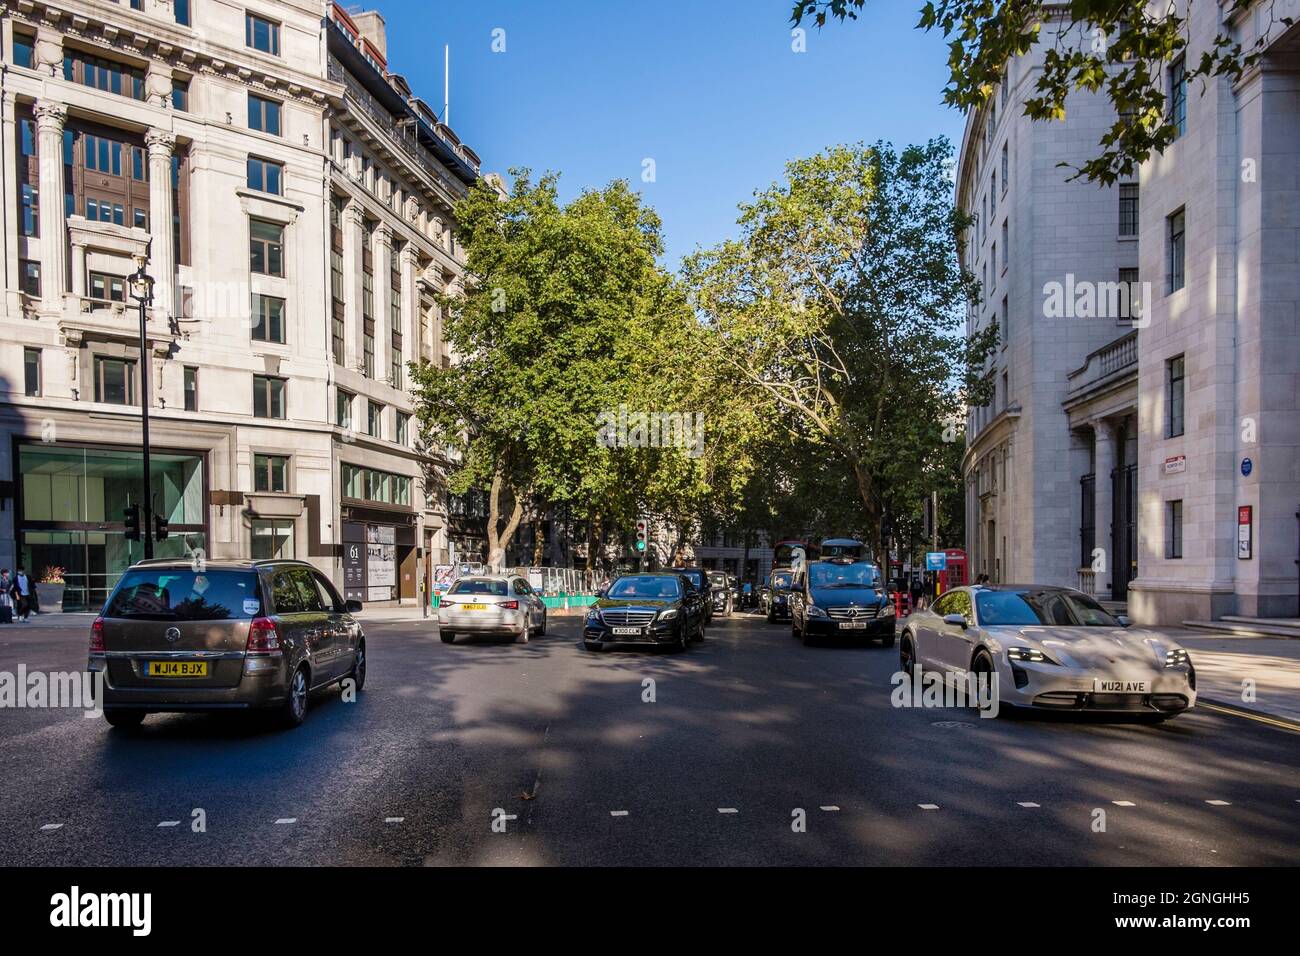 Aldwych two-way traffic flow system introduced in August 2021 as part of Westminster Council's Strand pedestrianisation project. London UK. Stock Photo